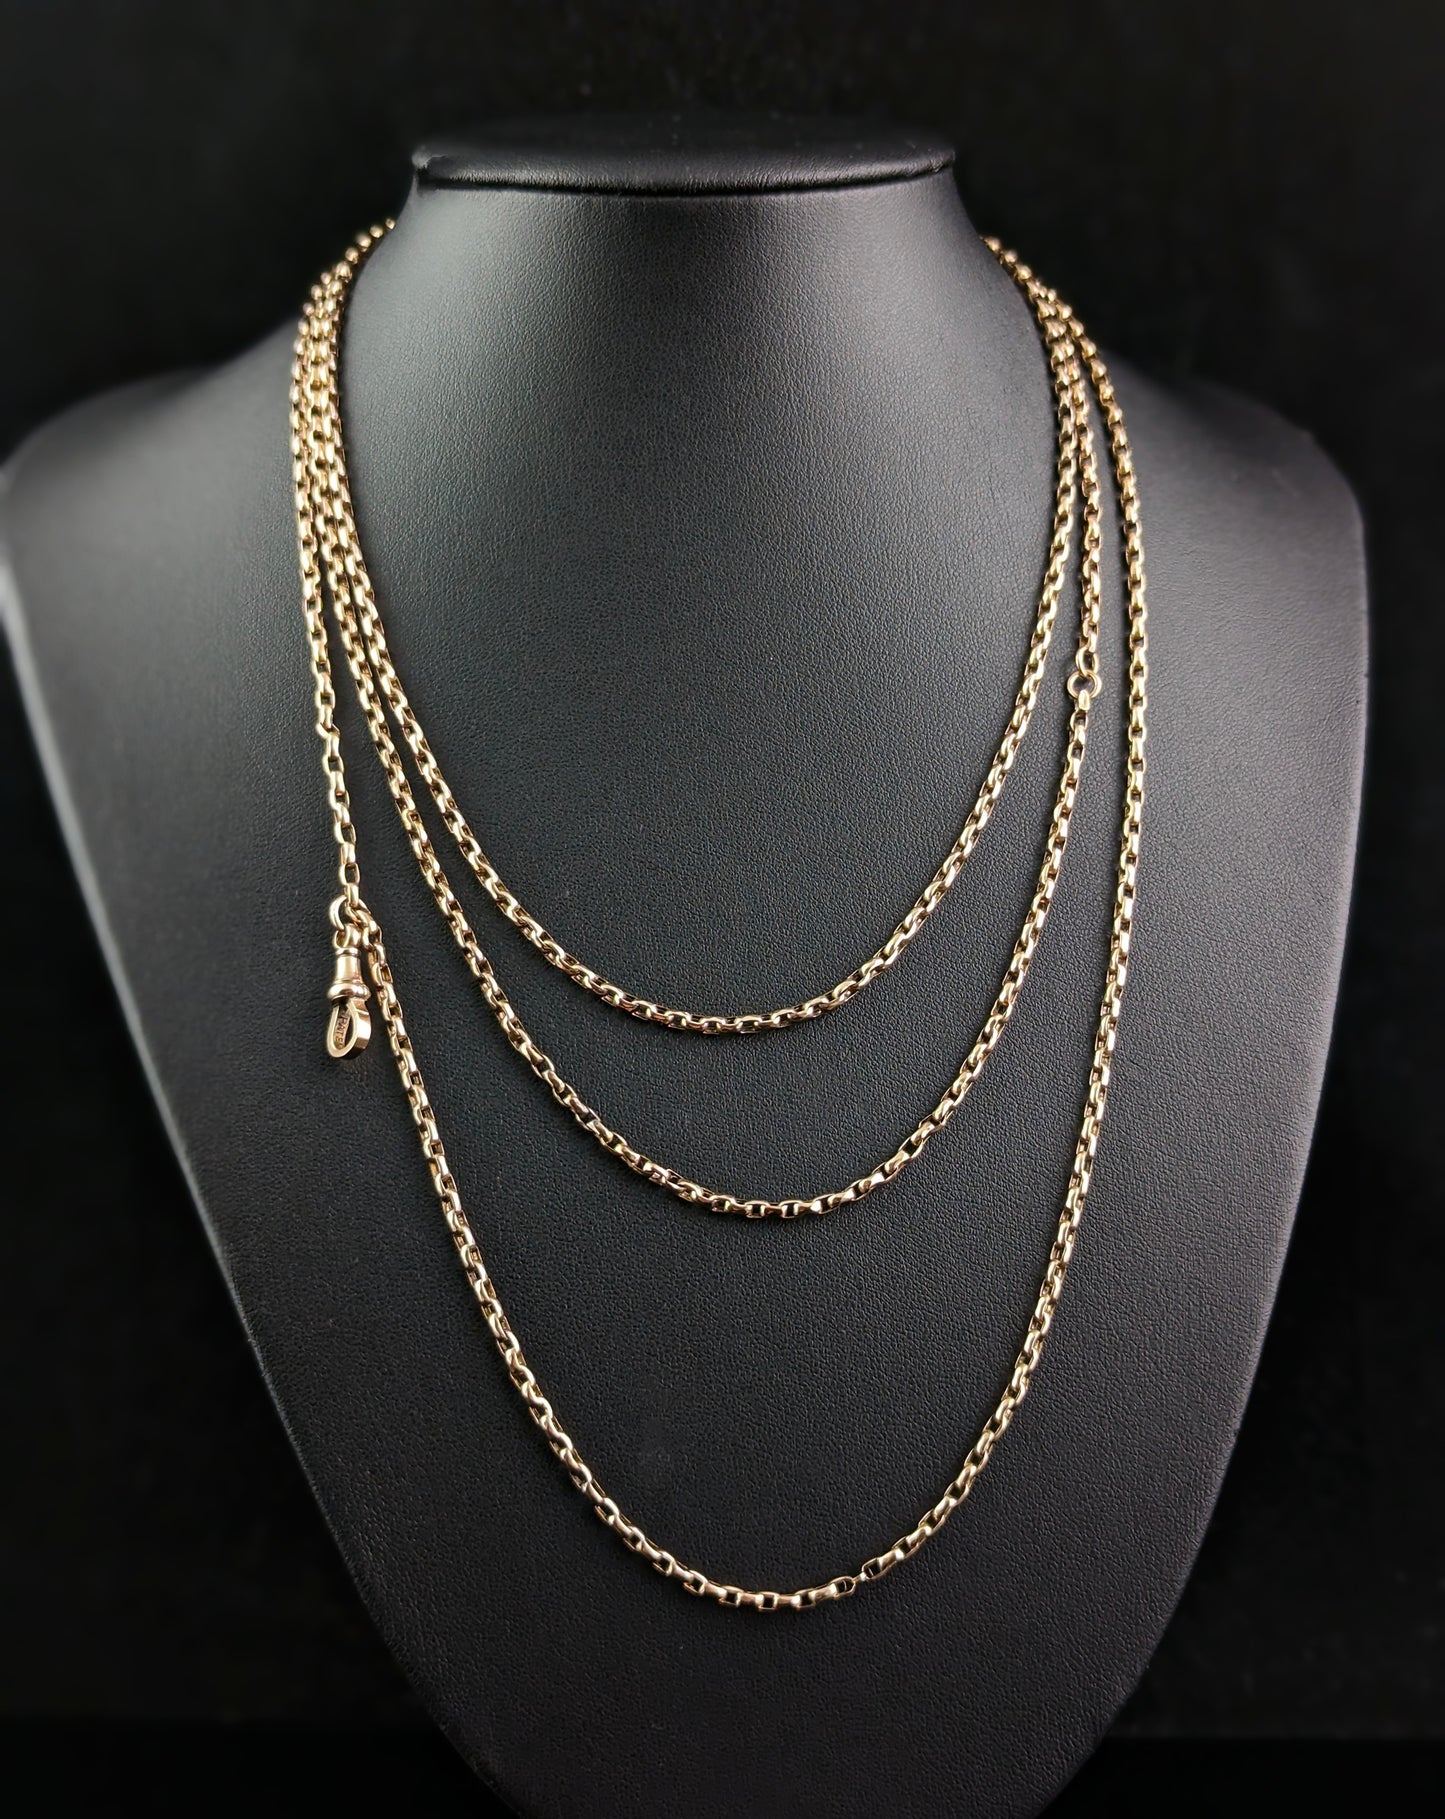 Antique 9ct gold longuard chain necklace, muff chain, Victorian